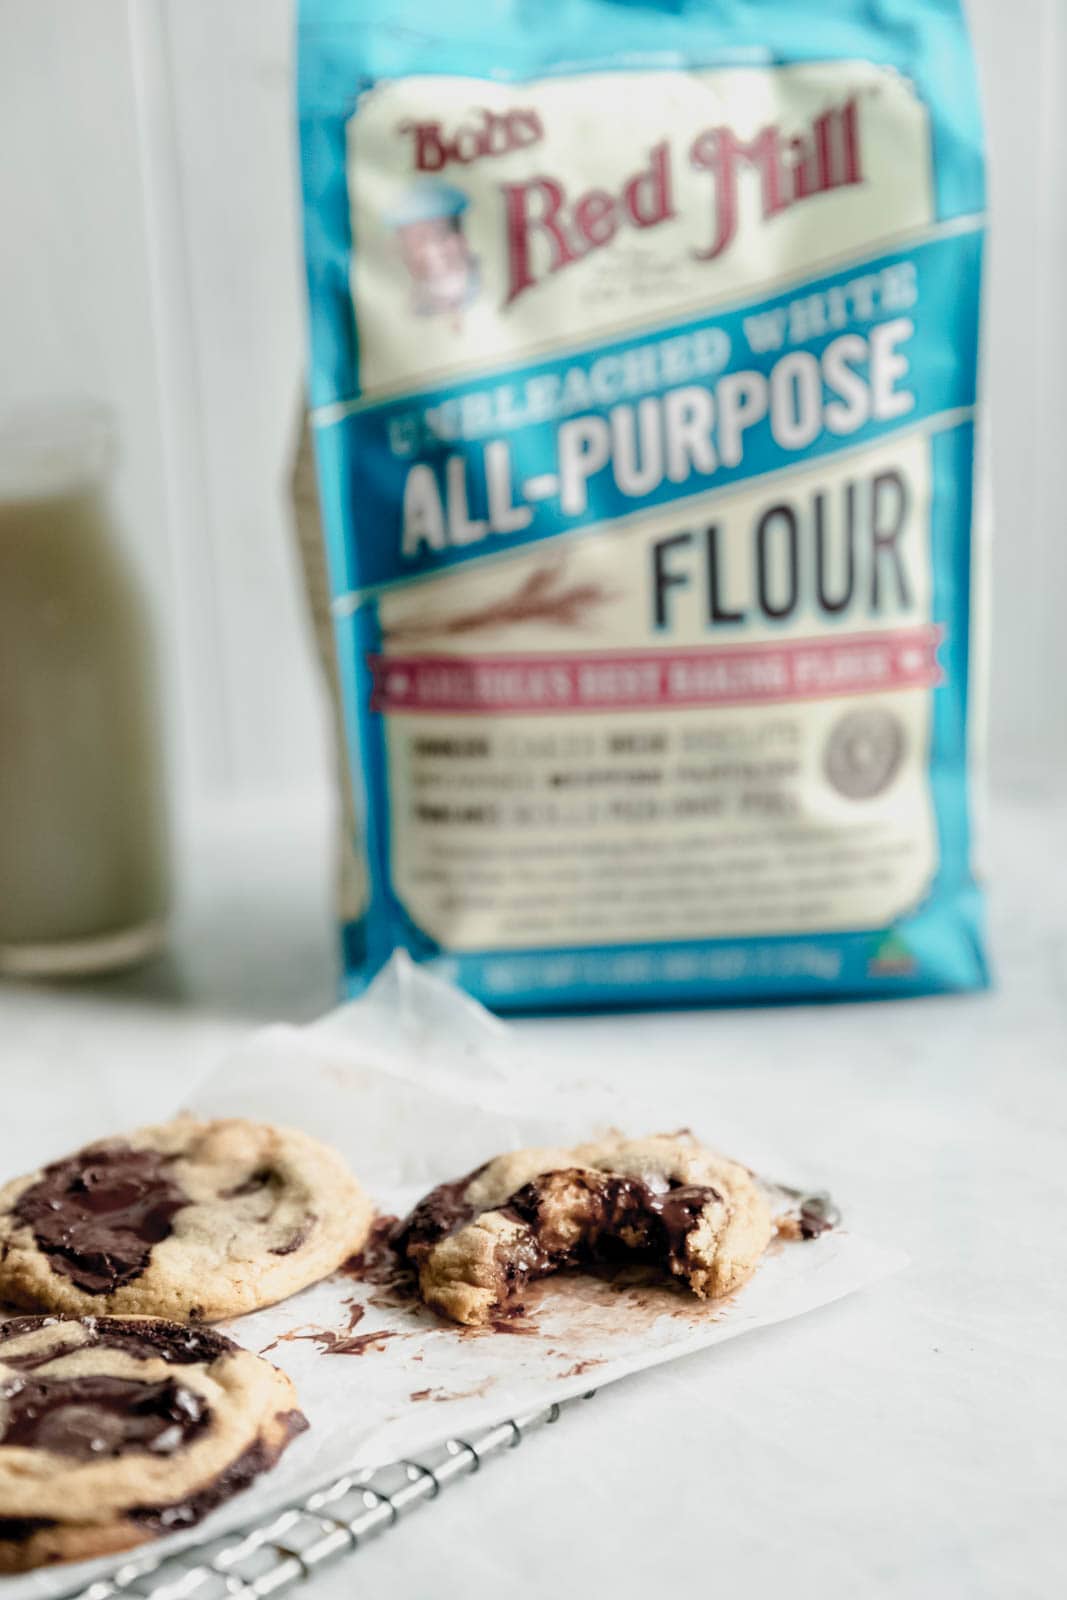 Candied Walnut Chocolate Chip Cookies with bag of flour